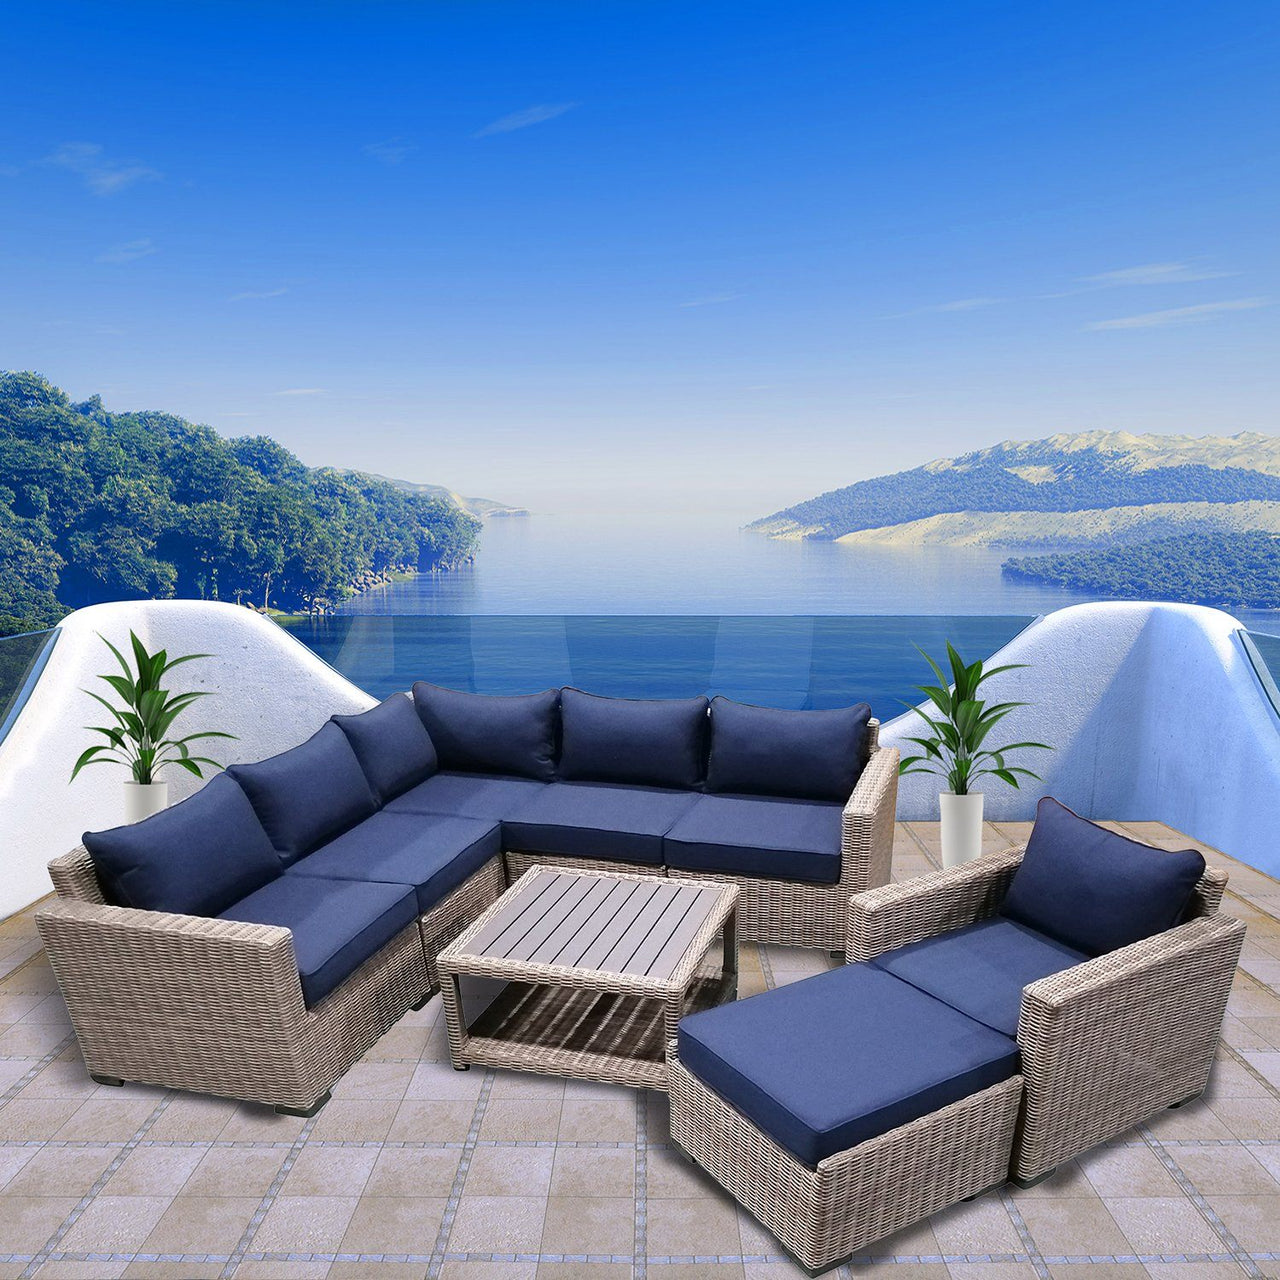 8-Piece Outdoor Pation Funiture Set Wicker Rattan Sectional Sofa Couch with Coffee Table Outdoor Furniture Casual Inc. 